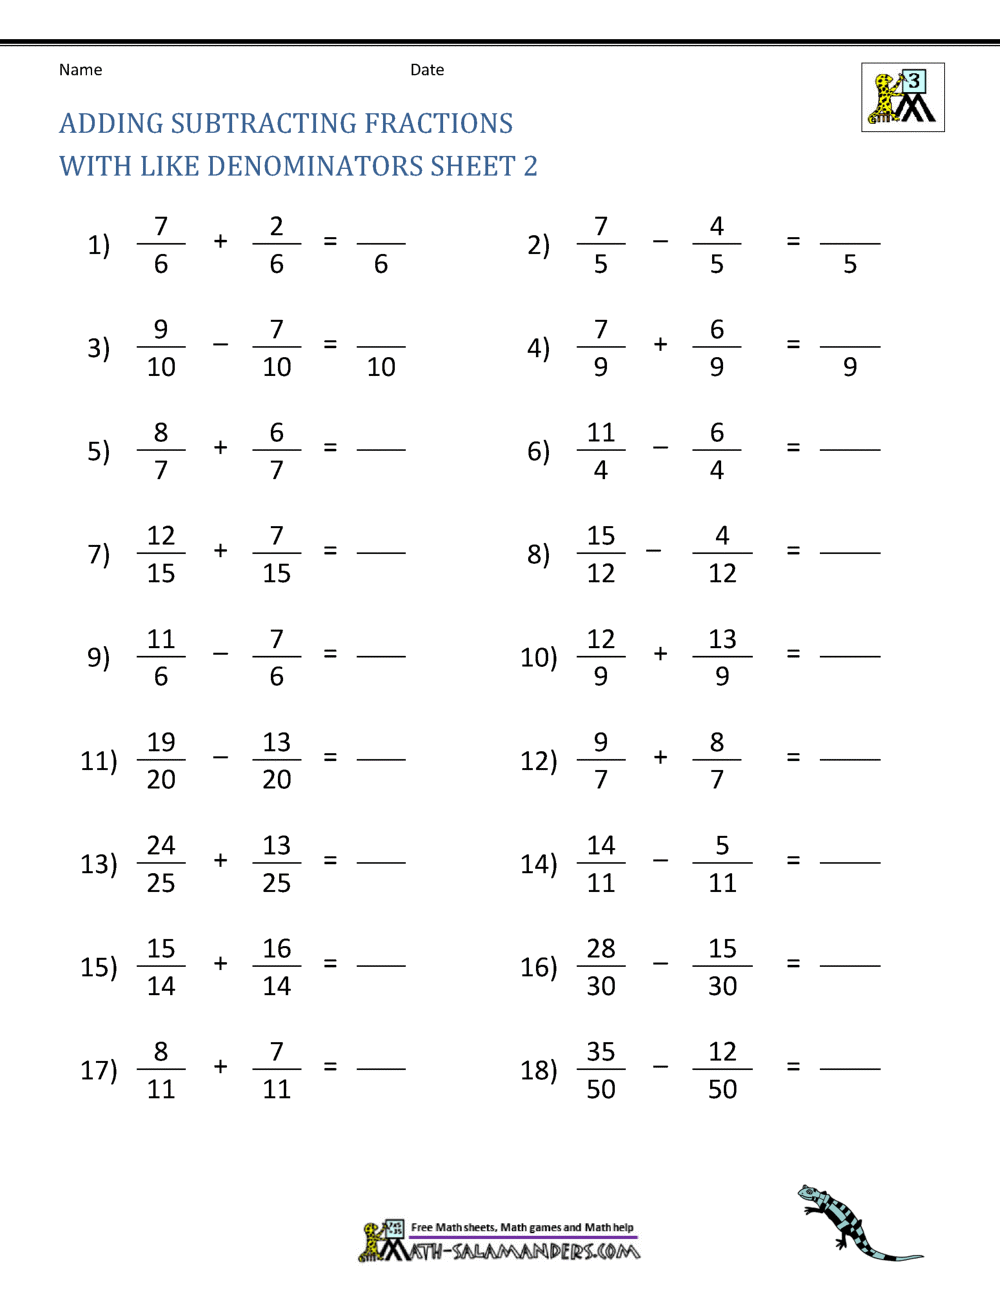 Adding Fractions With Like Denominators Worksheets Throughout Adding Rational Numbers Worksheet